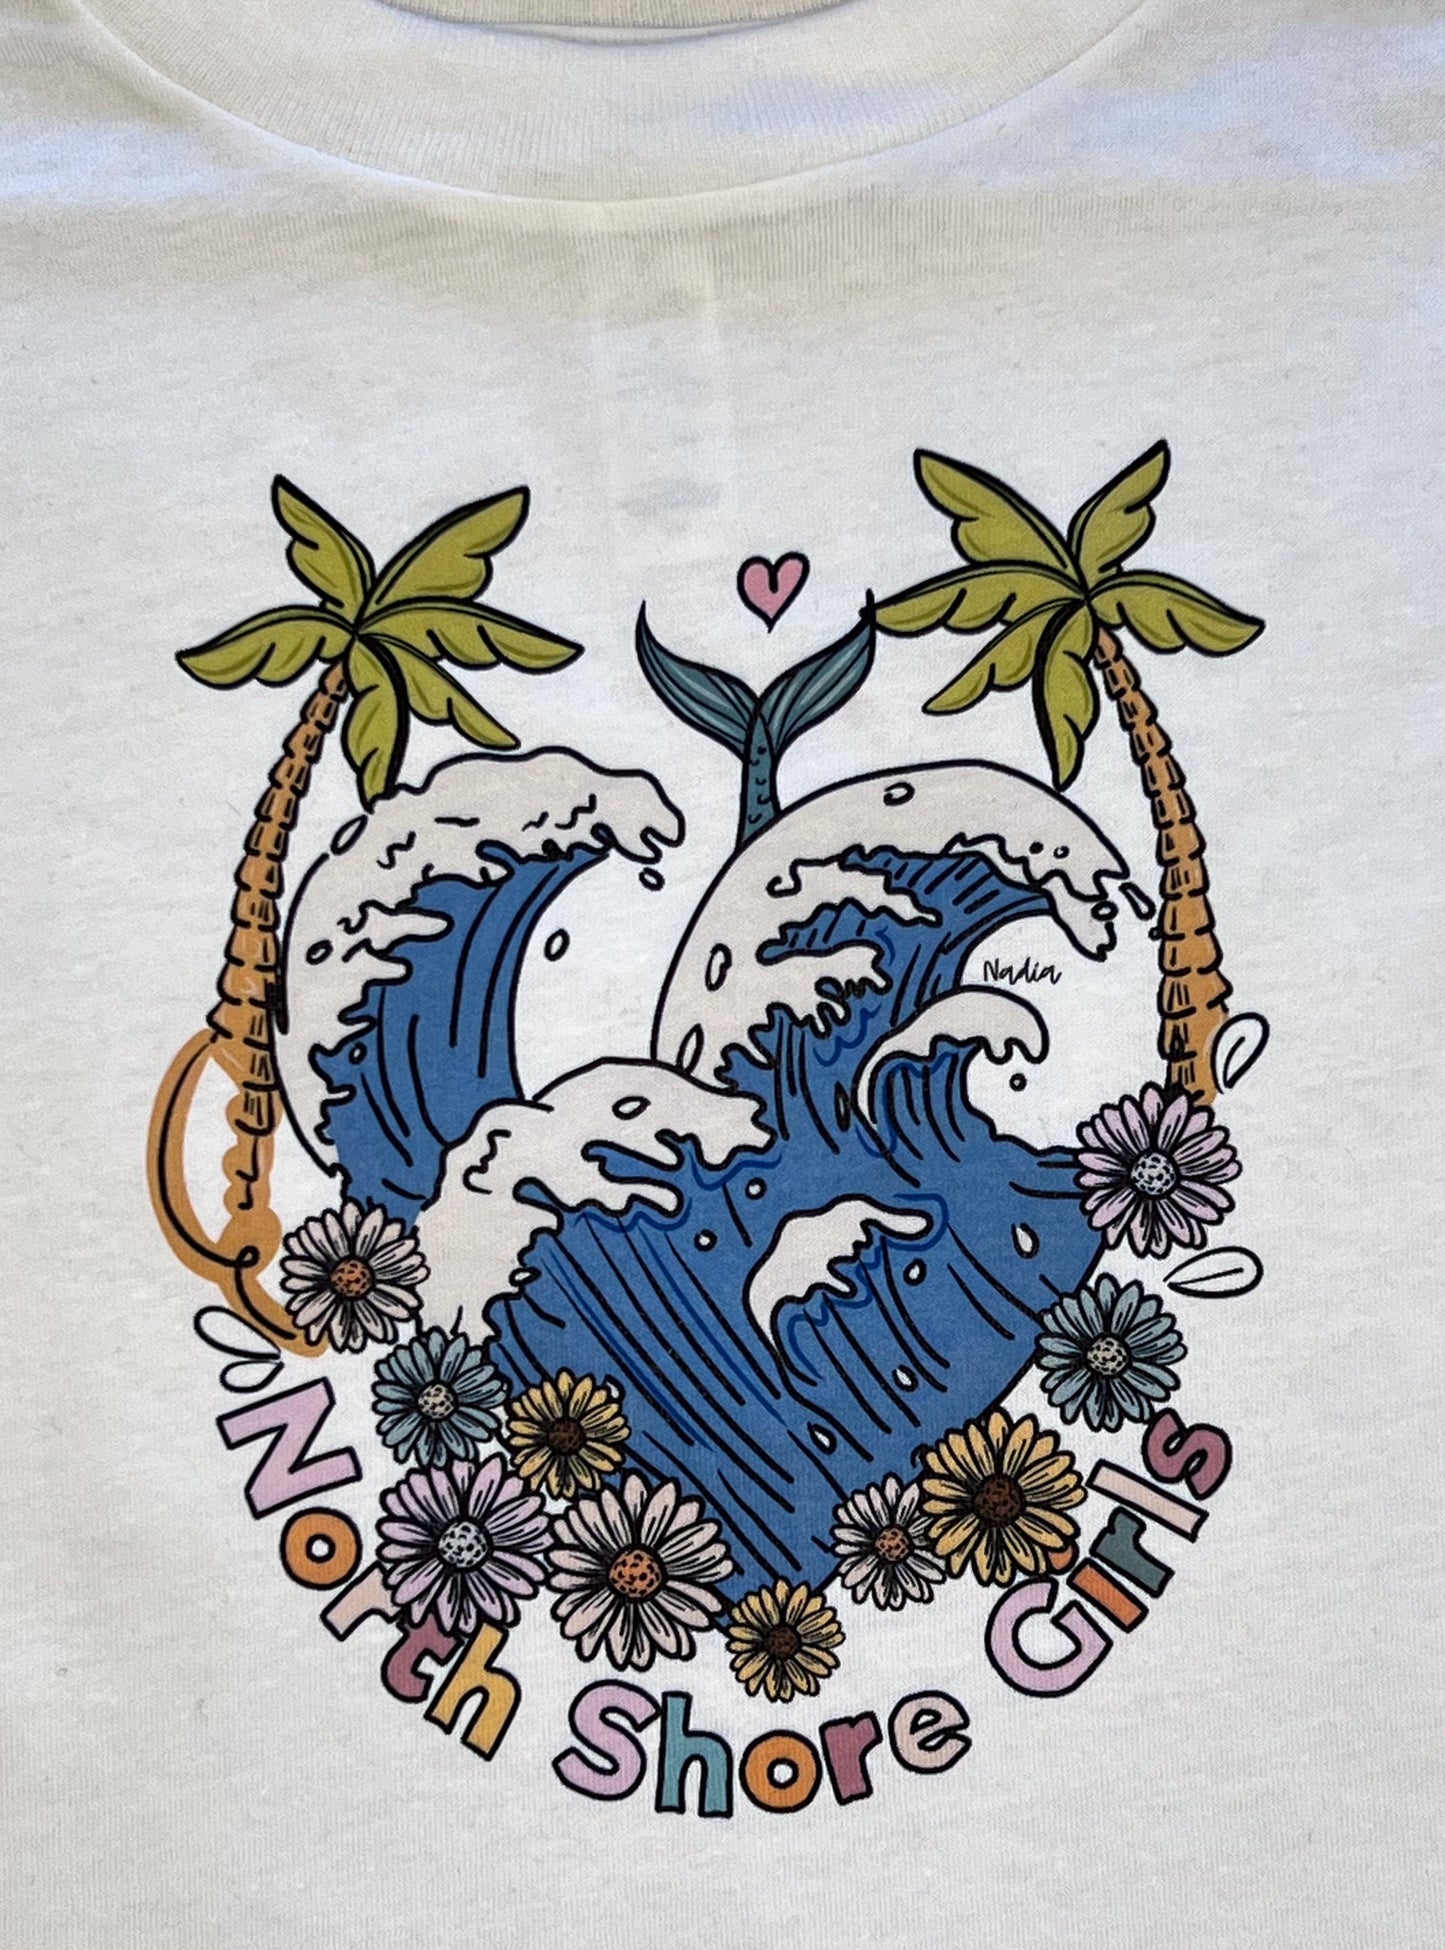 Load image into Gallery viewer, Wearable art by Nadia Watts. North Shore Girl graphic tee for surfer girls
